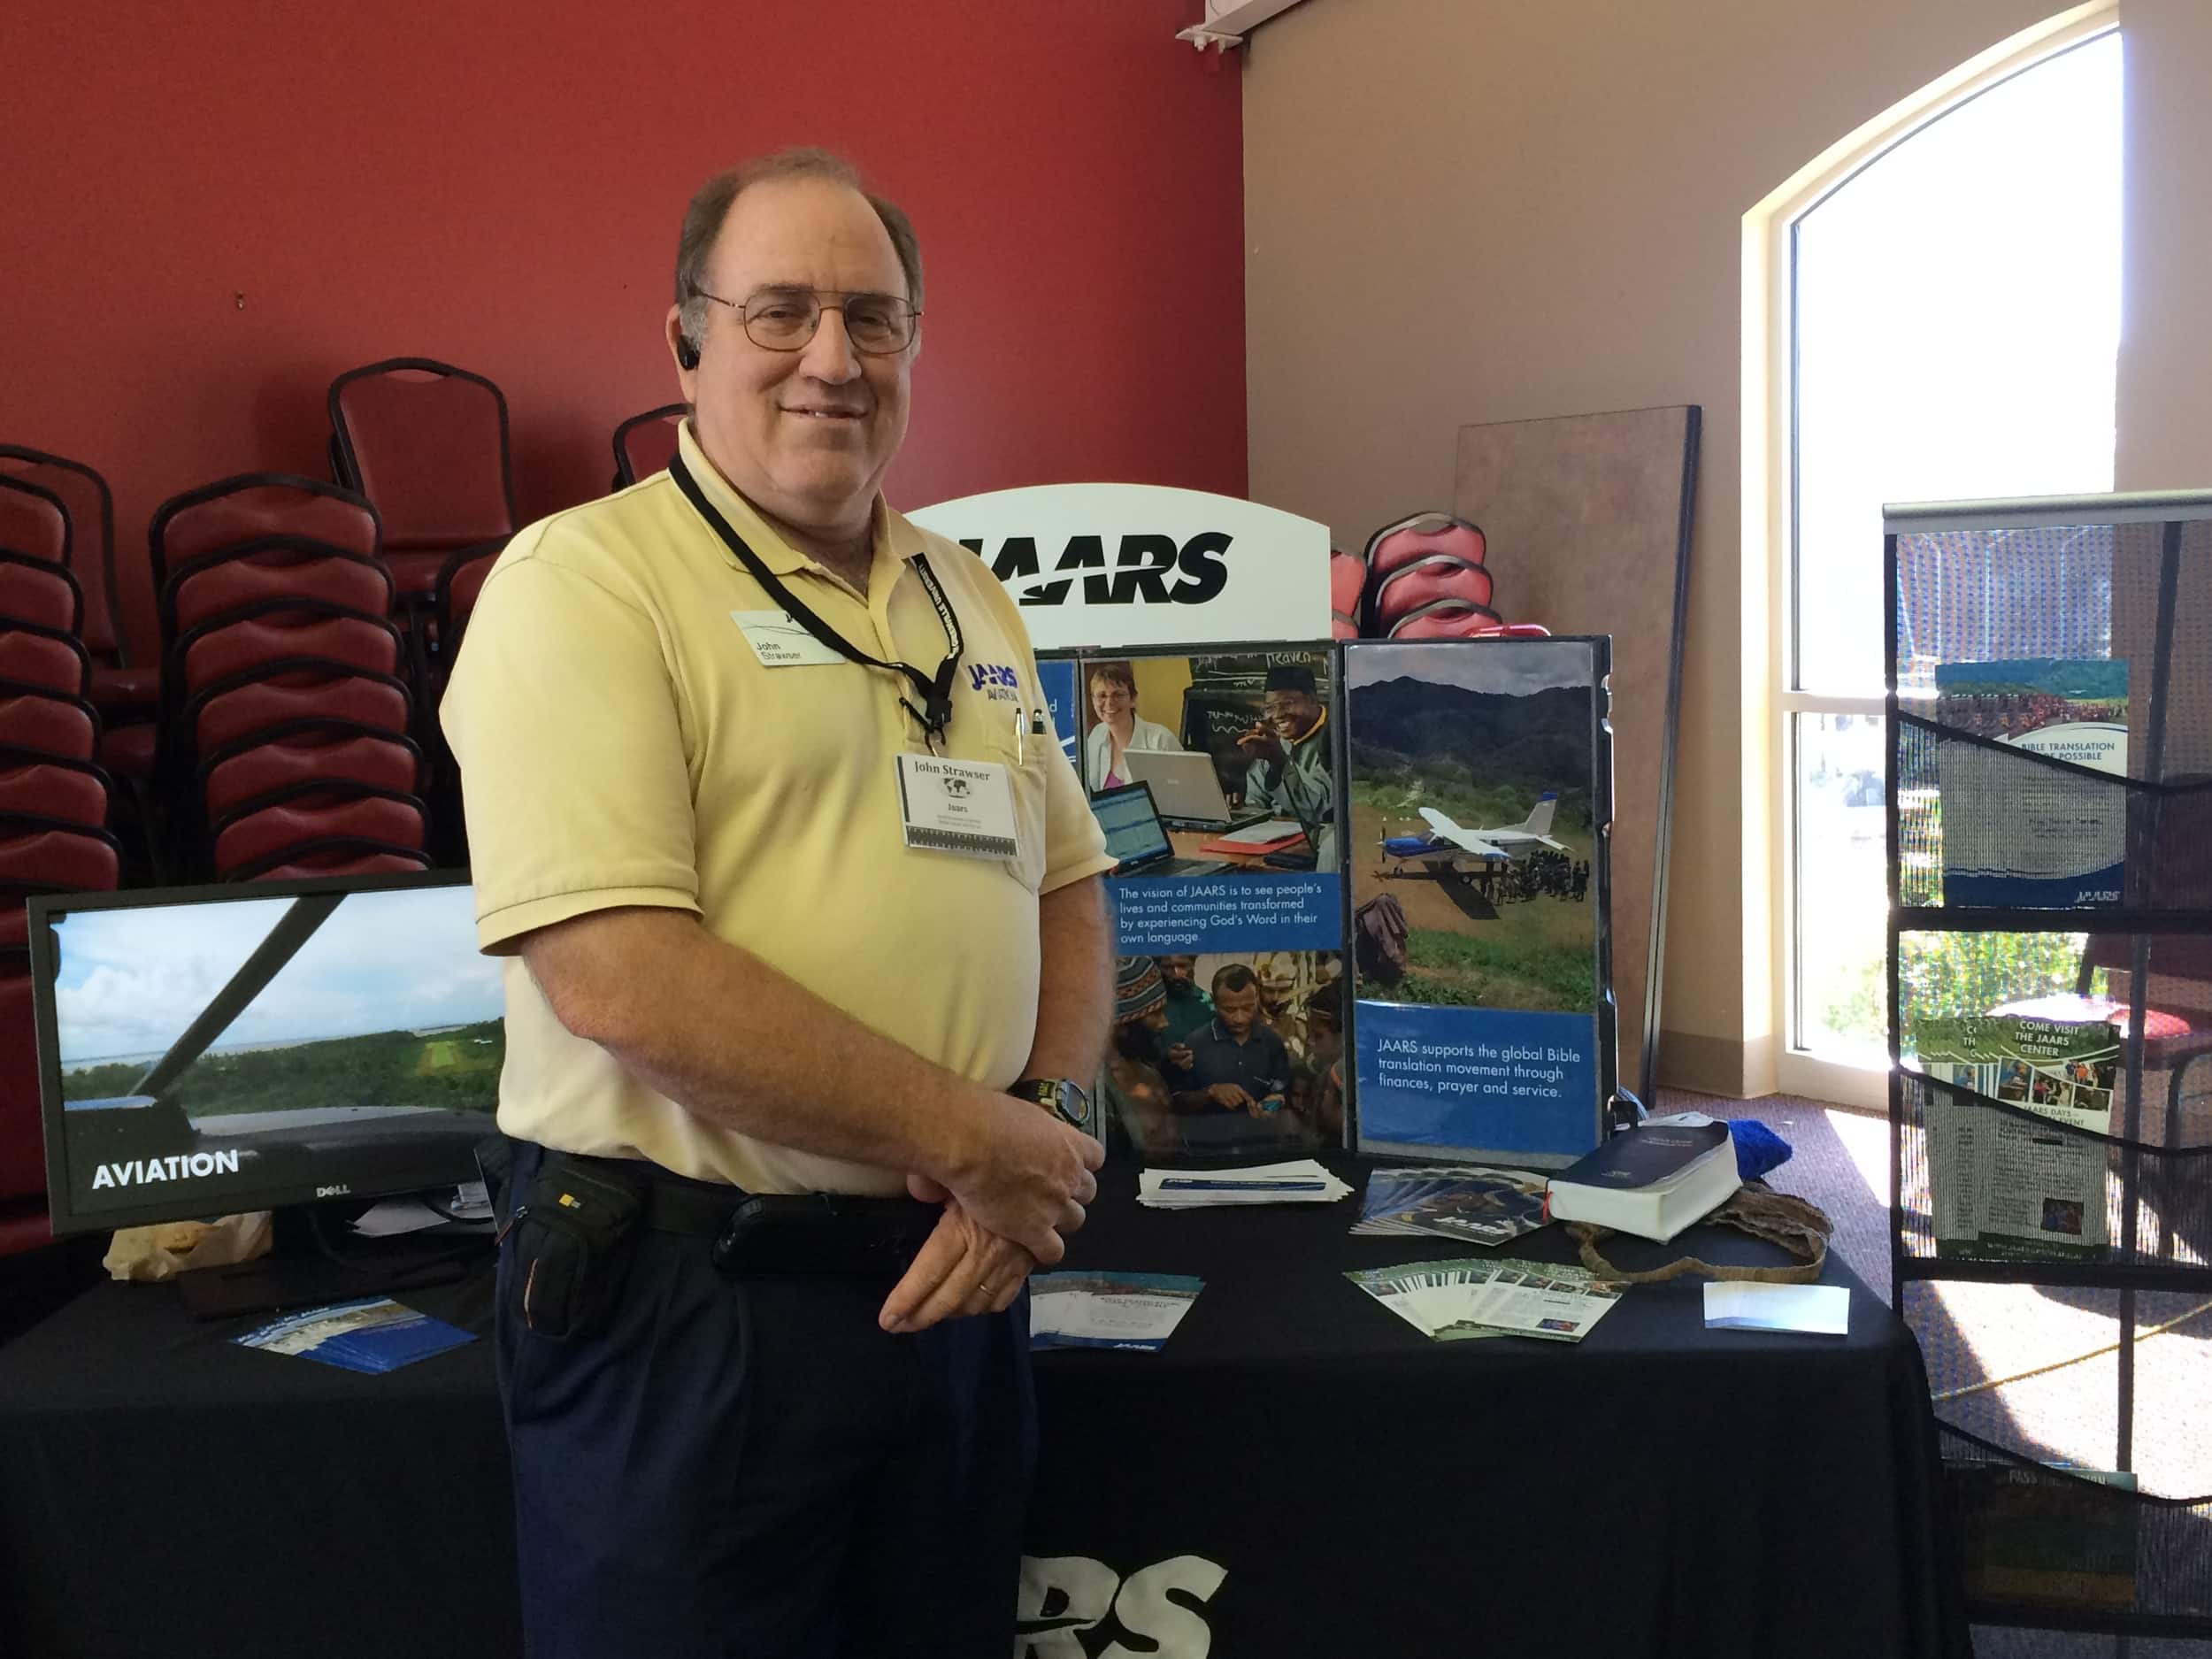 John Strawers takes time for a picture in front of his JAARS booth.